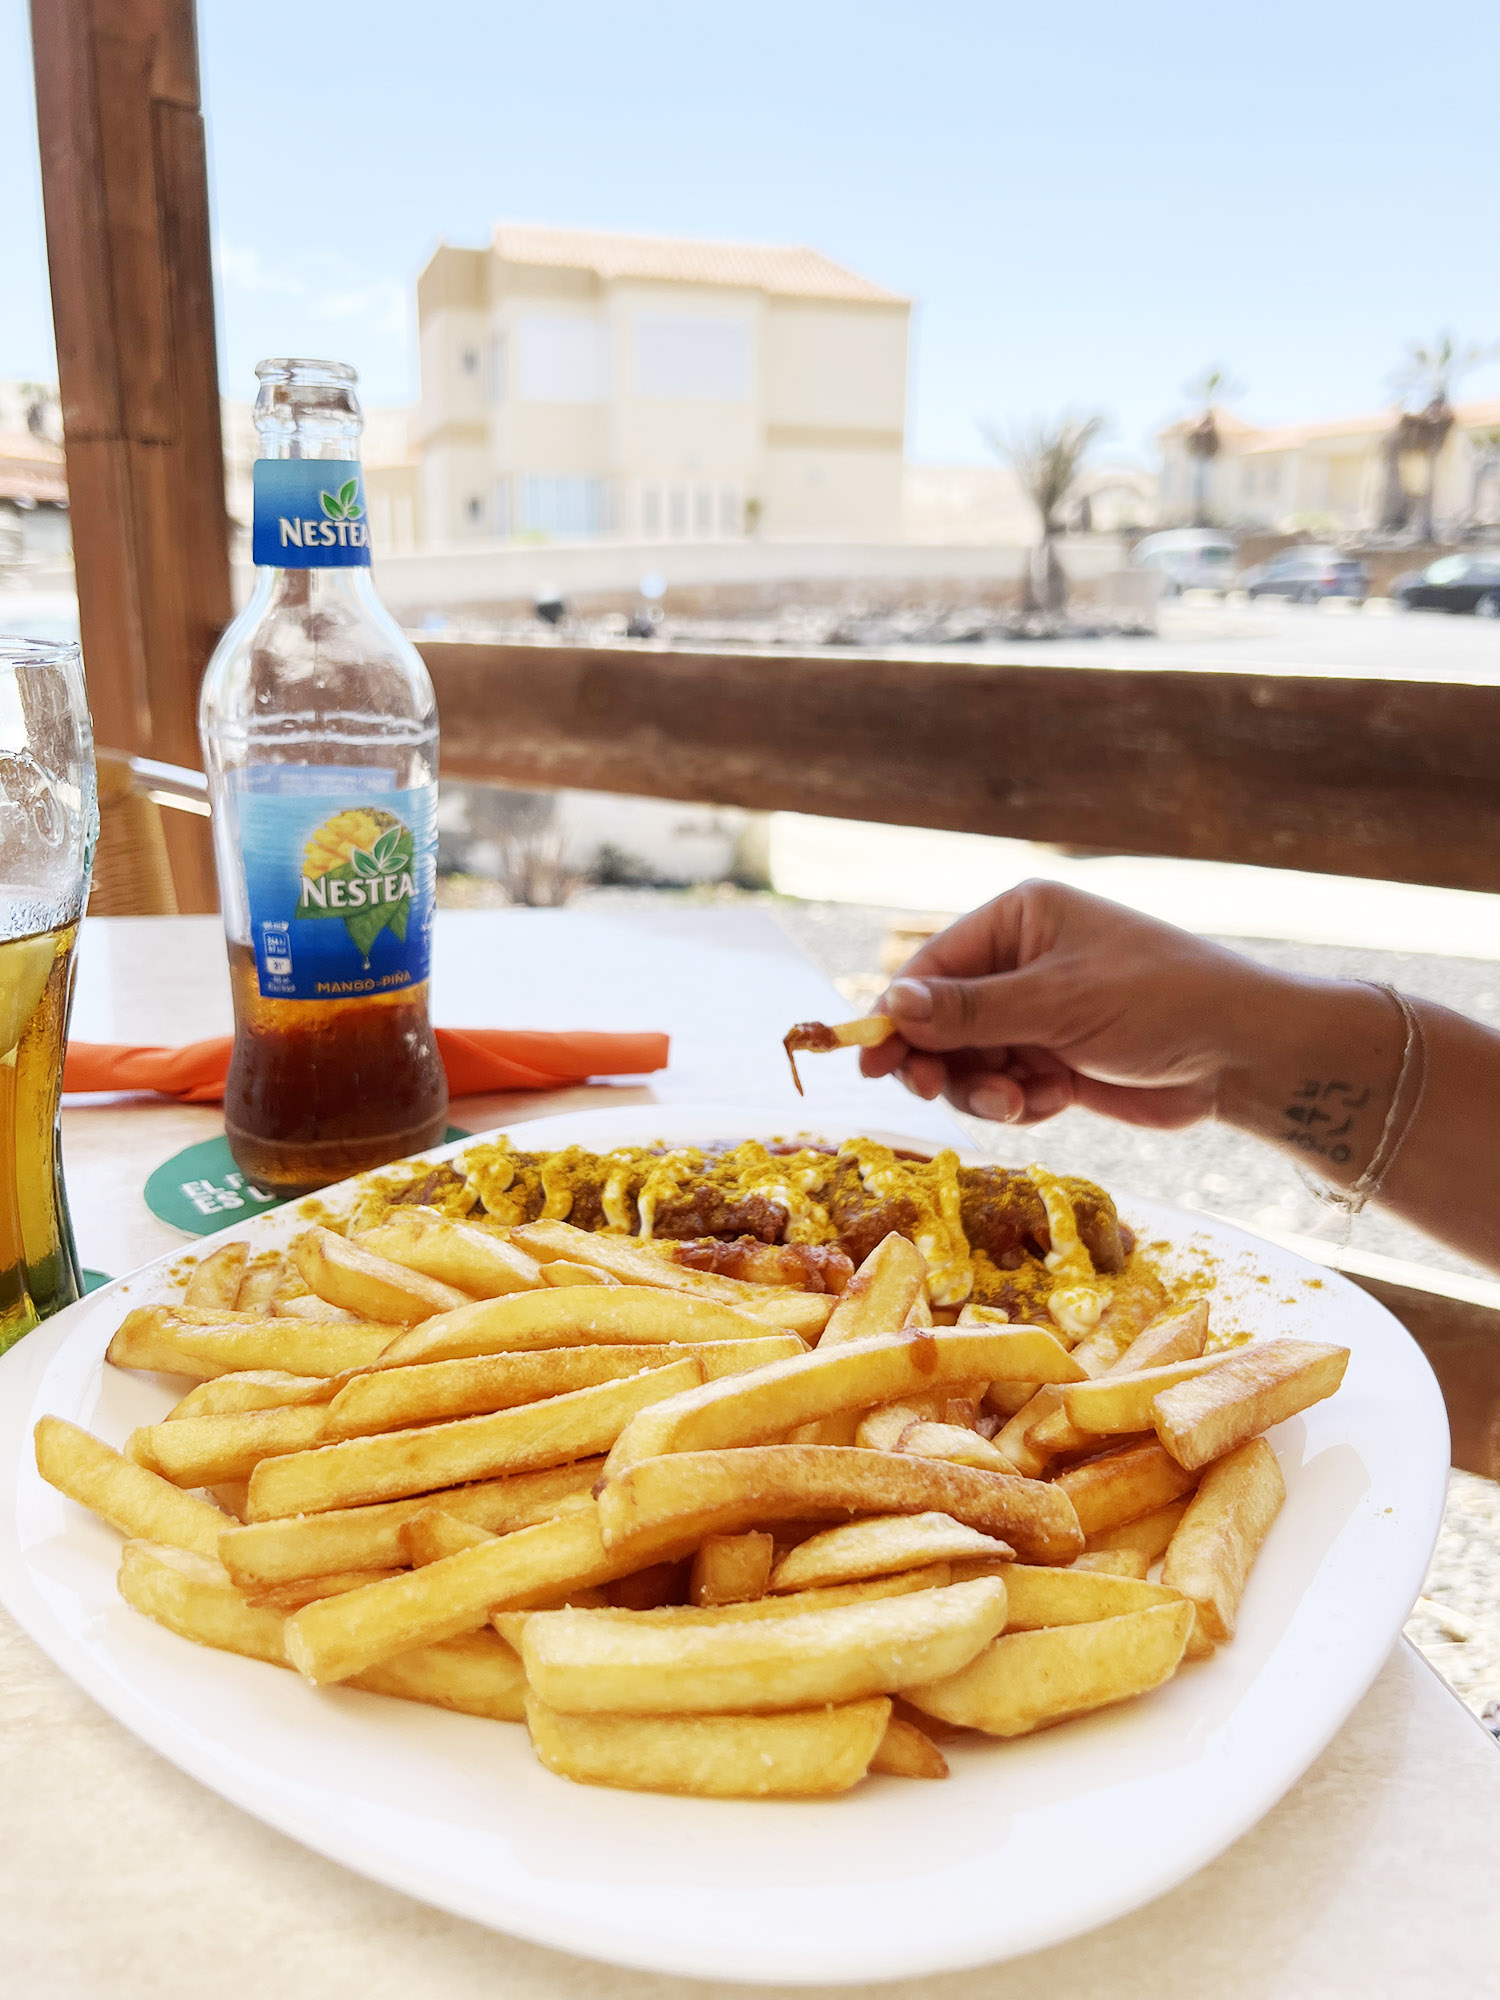 Fuerteventura: Plan B - A nice place for lunch in La Pared